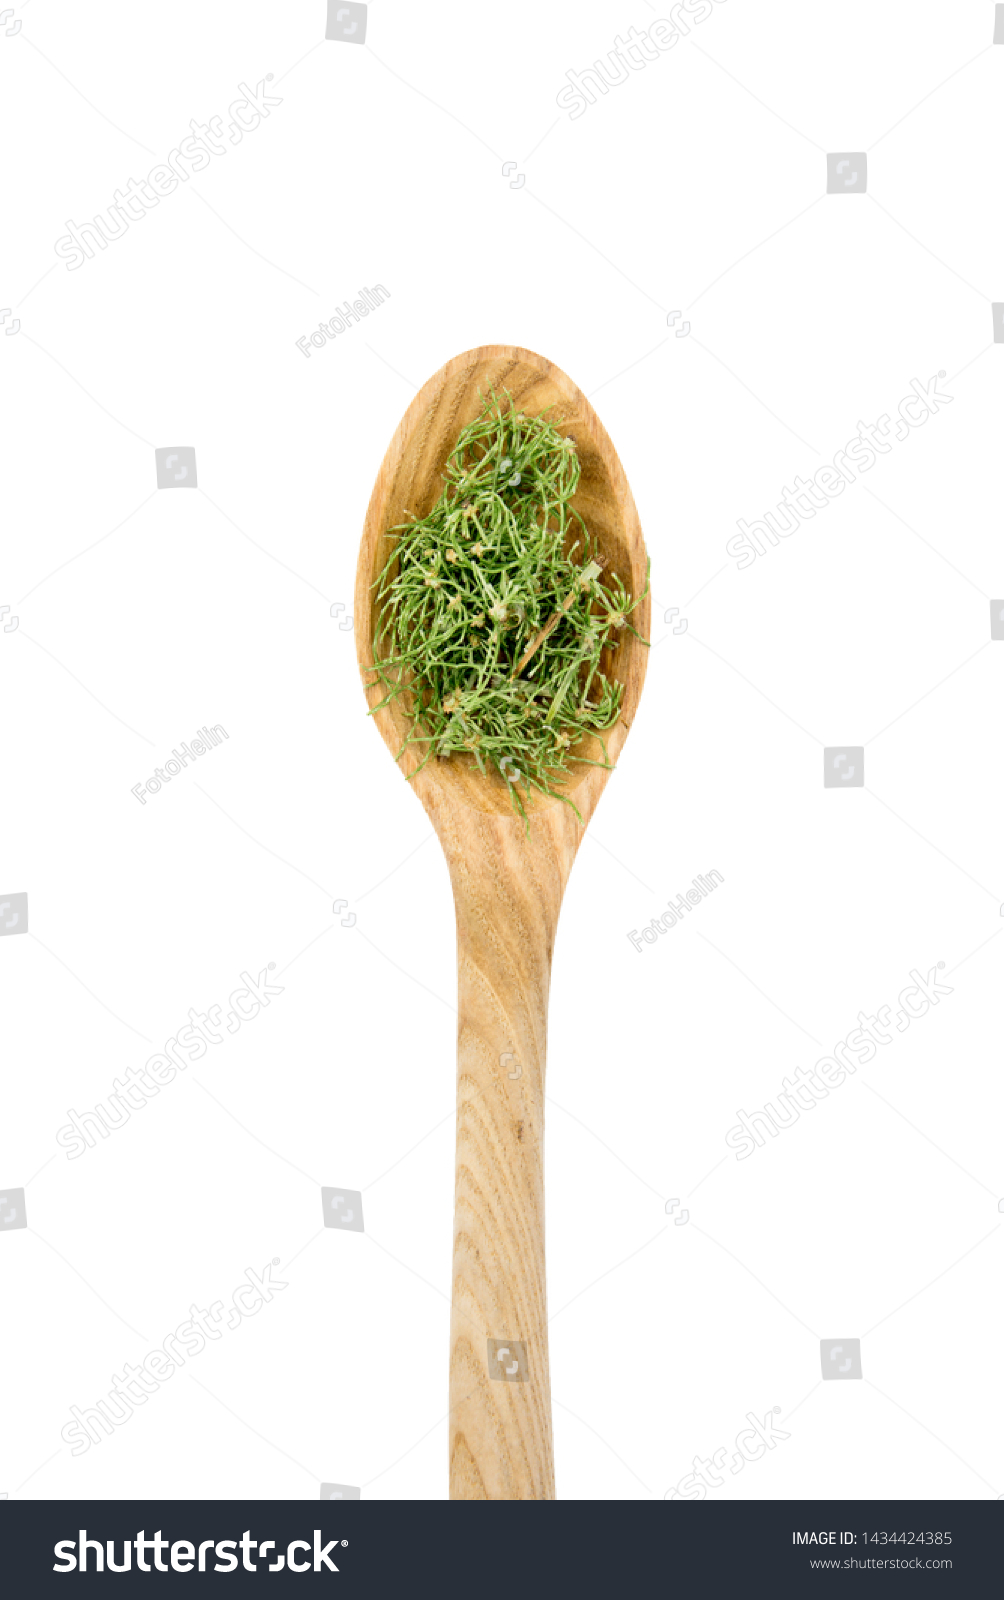 Top view heap of dried natural herbal remedy called Equisetum arvense the field horsetail or common horsetail on wooden spoon isolated on white background. #1434424385